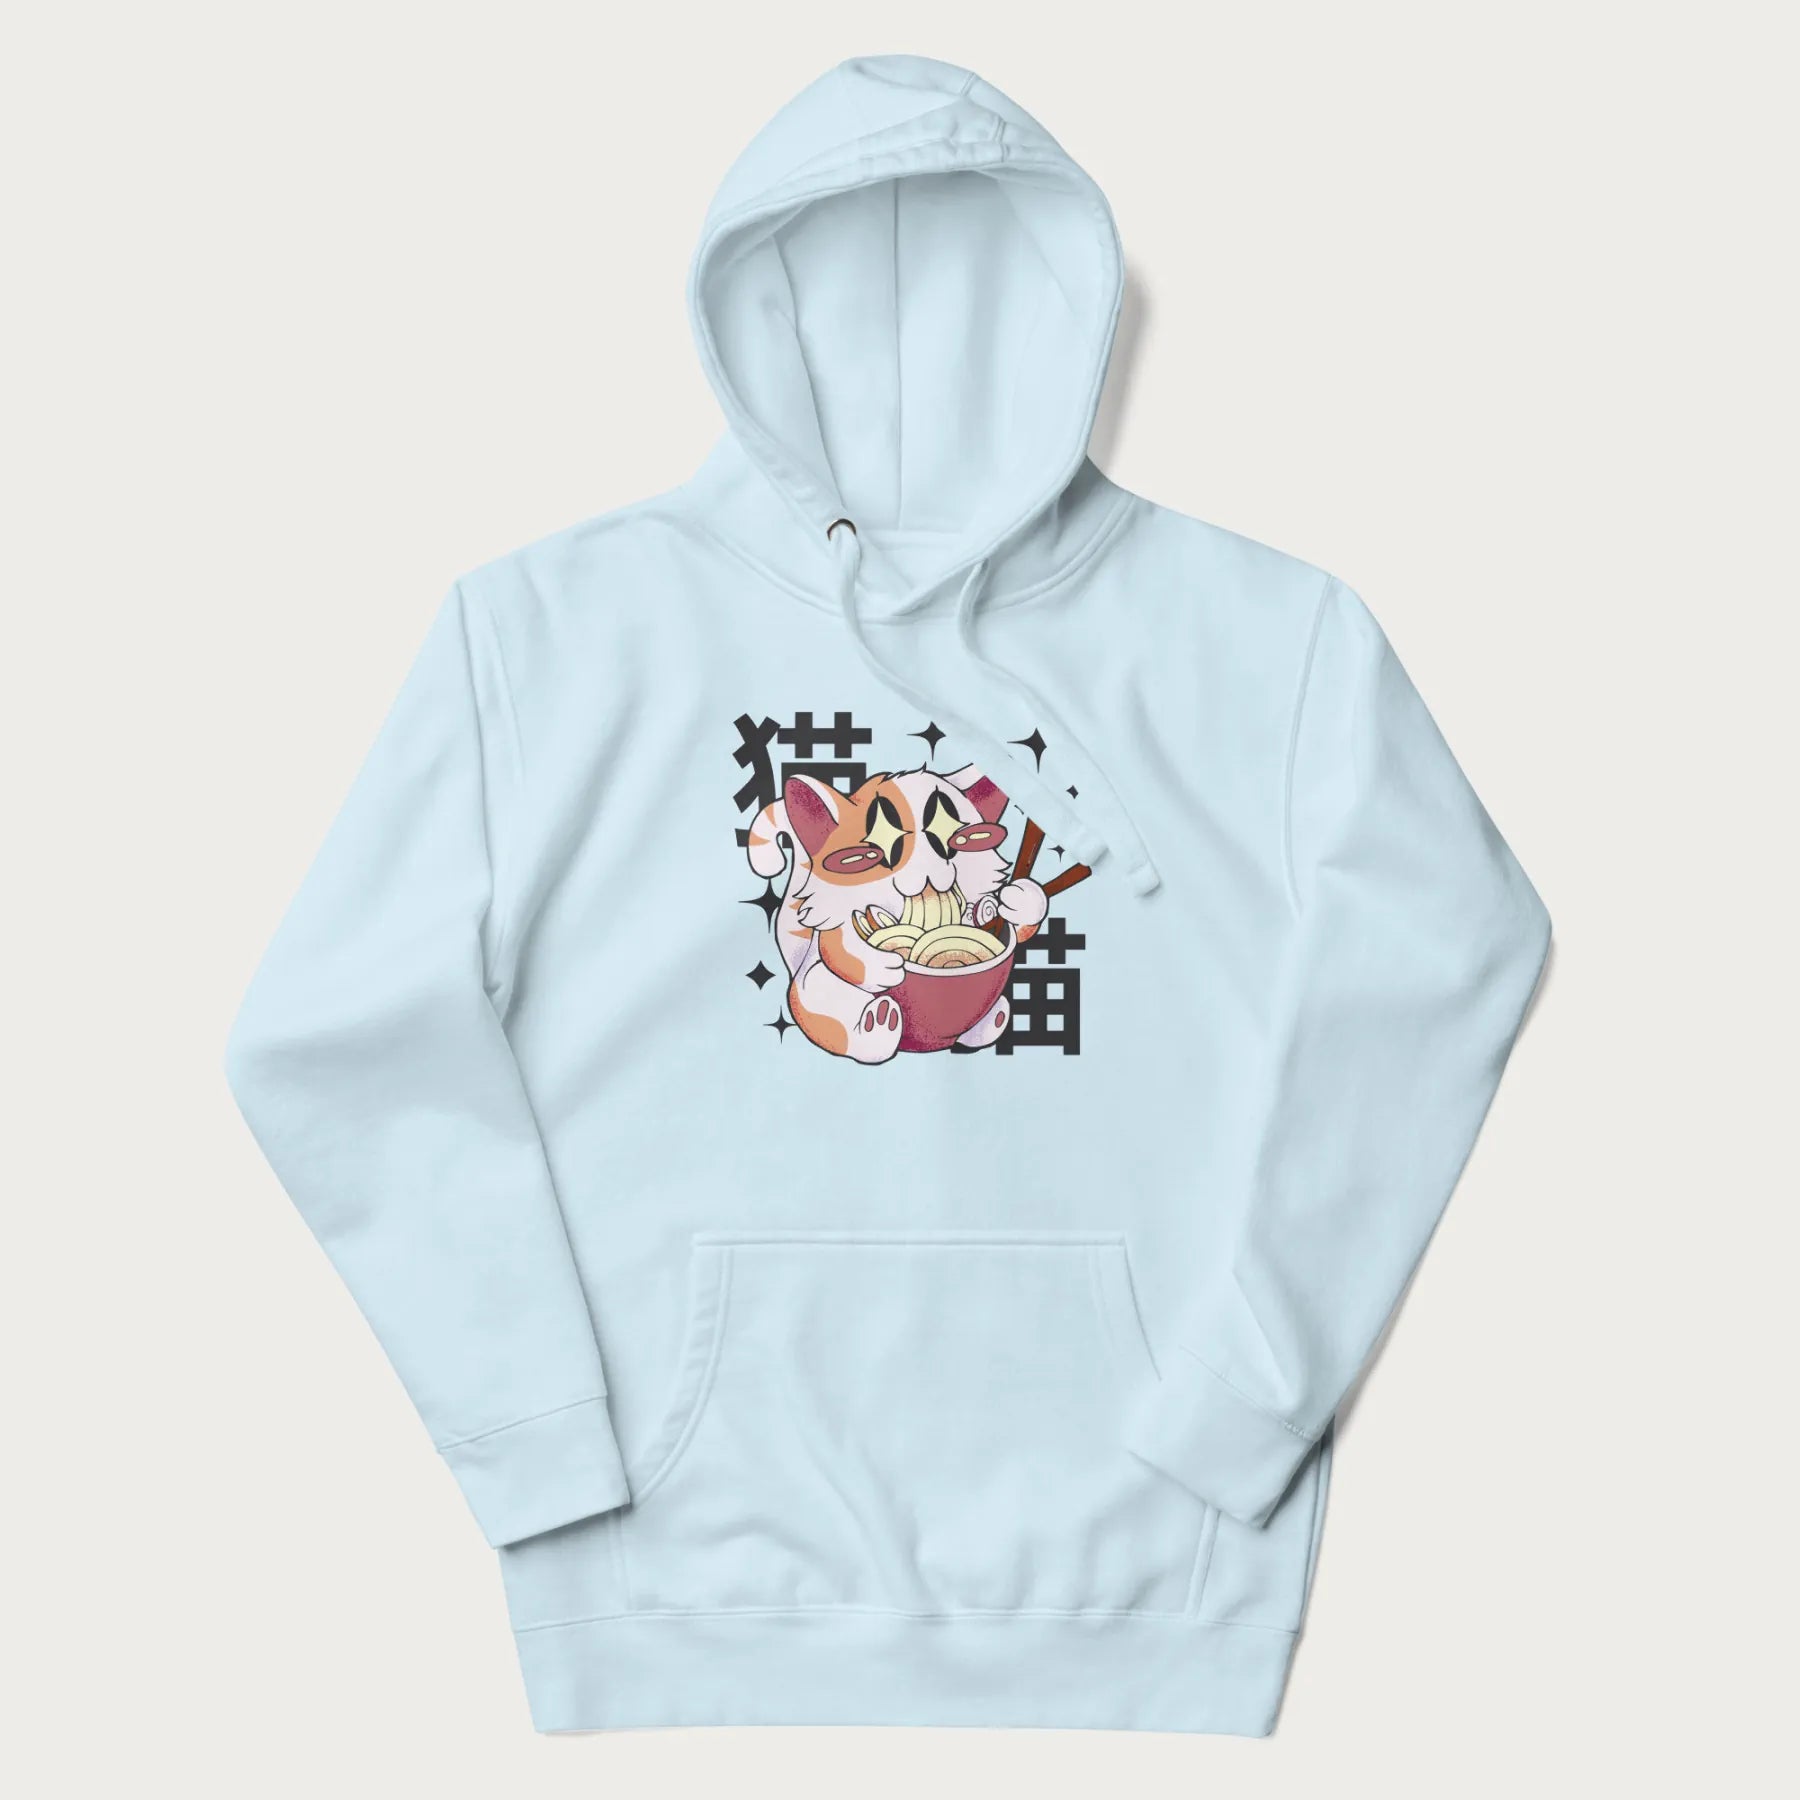 Light blue hoodie with Japanese graphic of a cat eating ramen with Japanese text '猫' in the background.